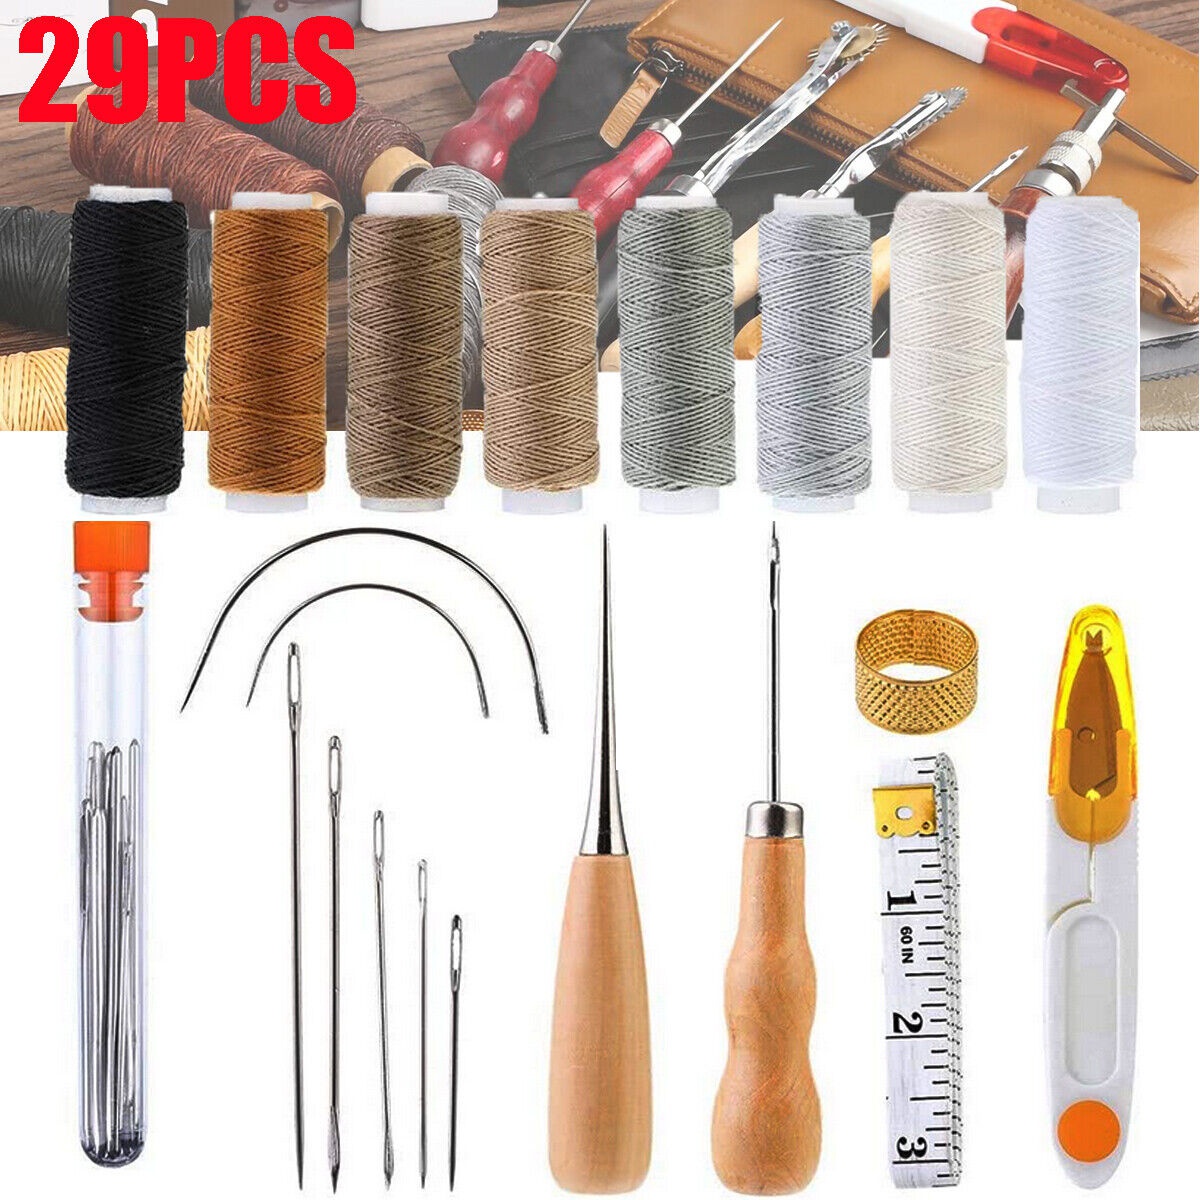 QJH 2 Pcs Leather Scratch Stitching Awl/ Leather Awl Tool Craft Sewing  Punching/ Hole Maker Stitching/ Solid Wood Leather Tools - AliExpress